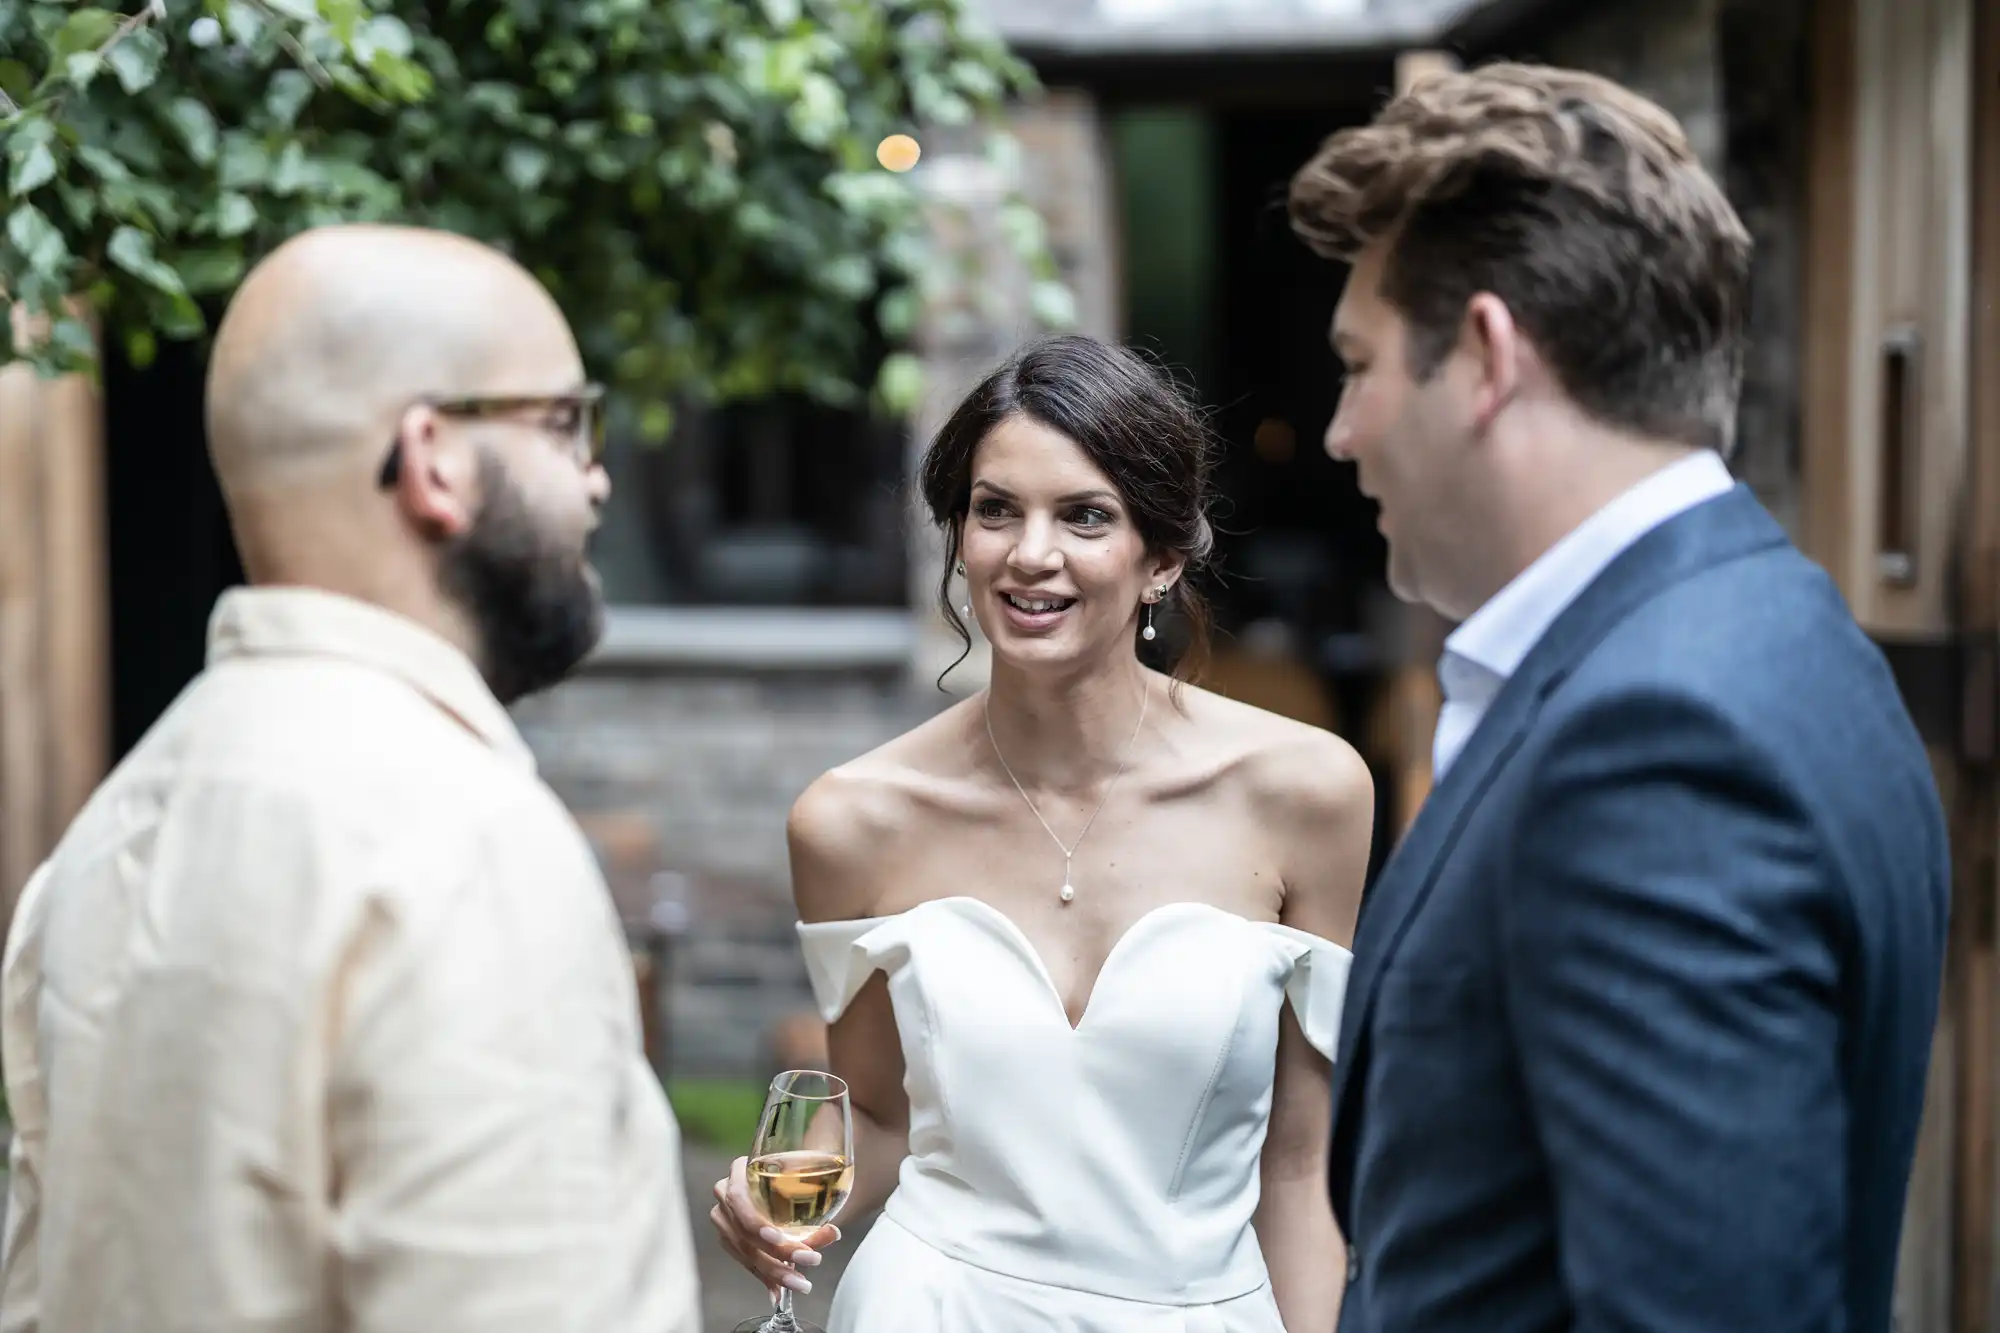 A bride in a white off-shoulder dress holding a glass of wine converses with two men in suits at an outdoor gathering.